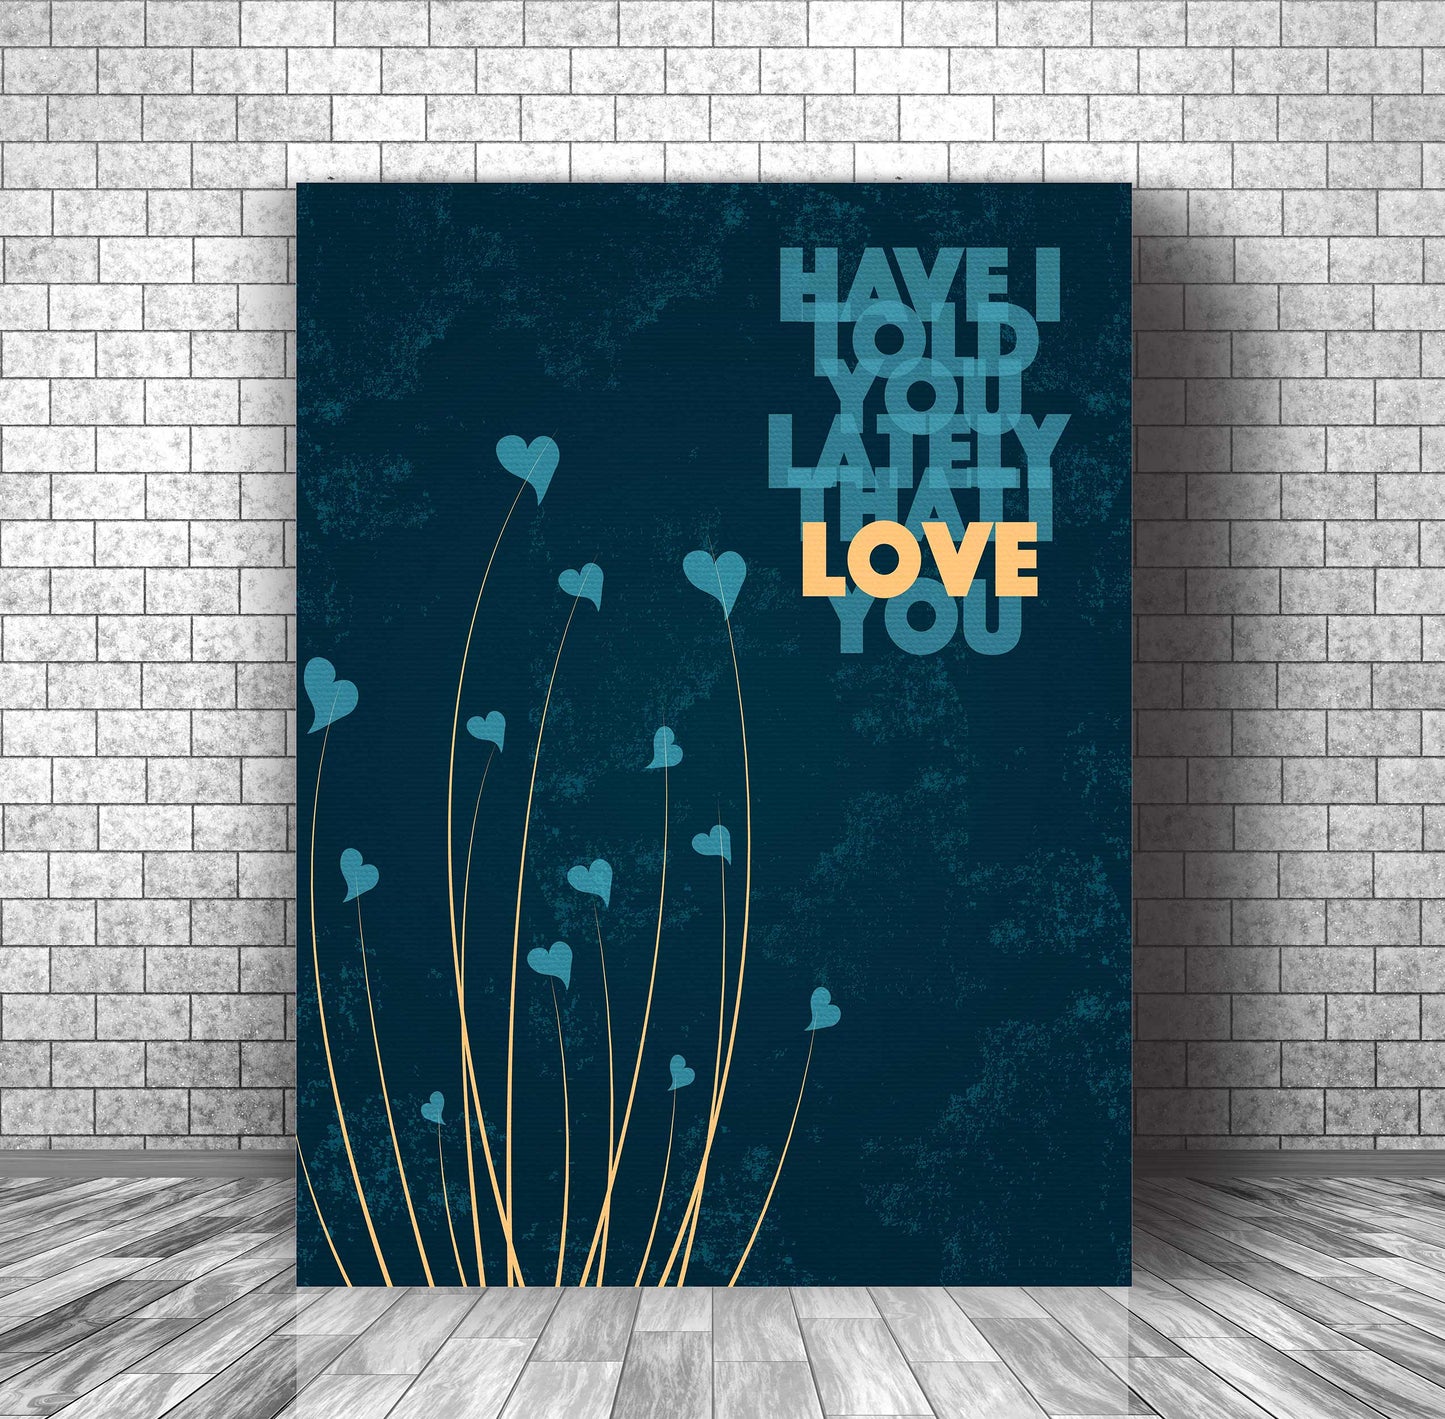 Have I Told you Lately by Rod Stewart - Song Lyric Inspired Song Lyrics Art Song Lyrics Art 11x14 Canvas Wrap 